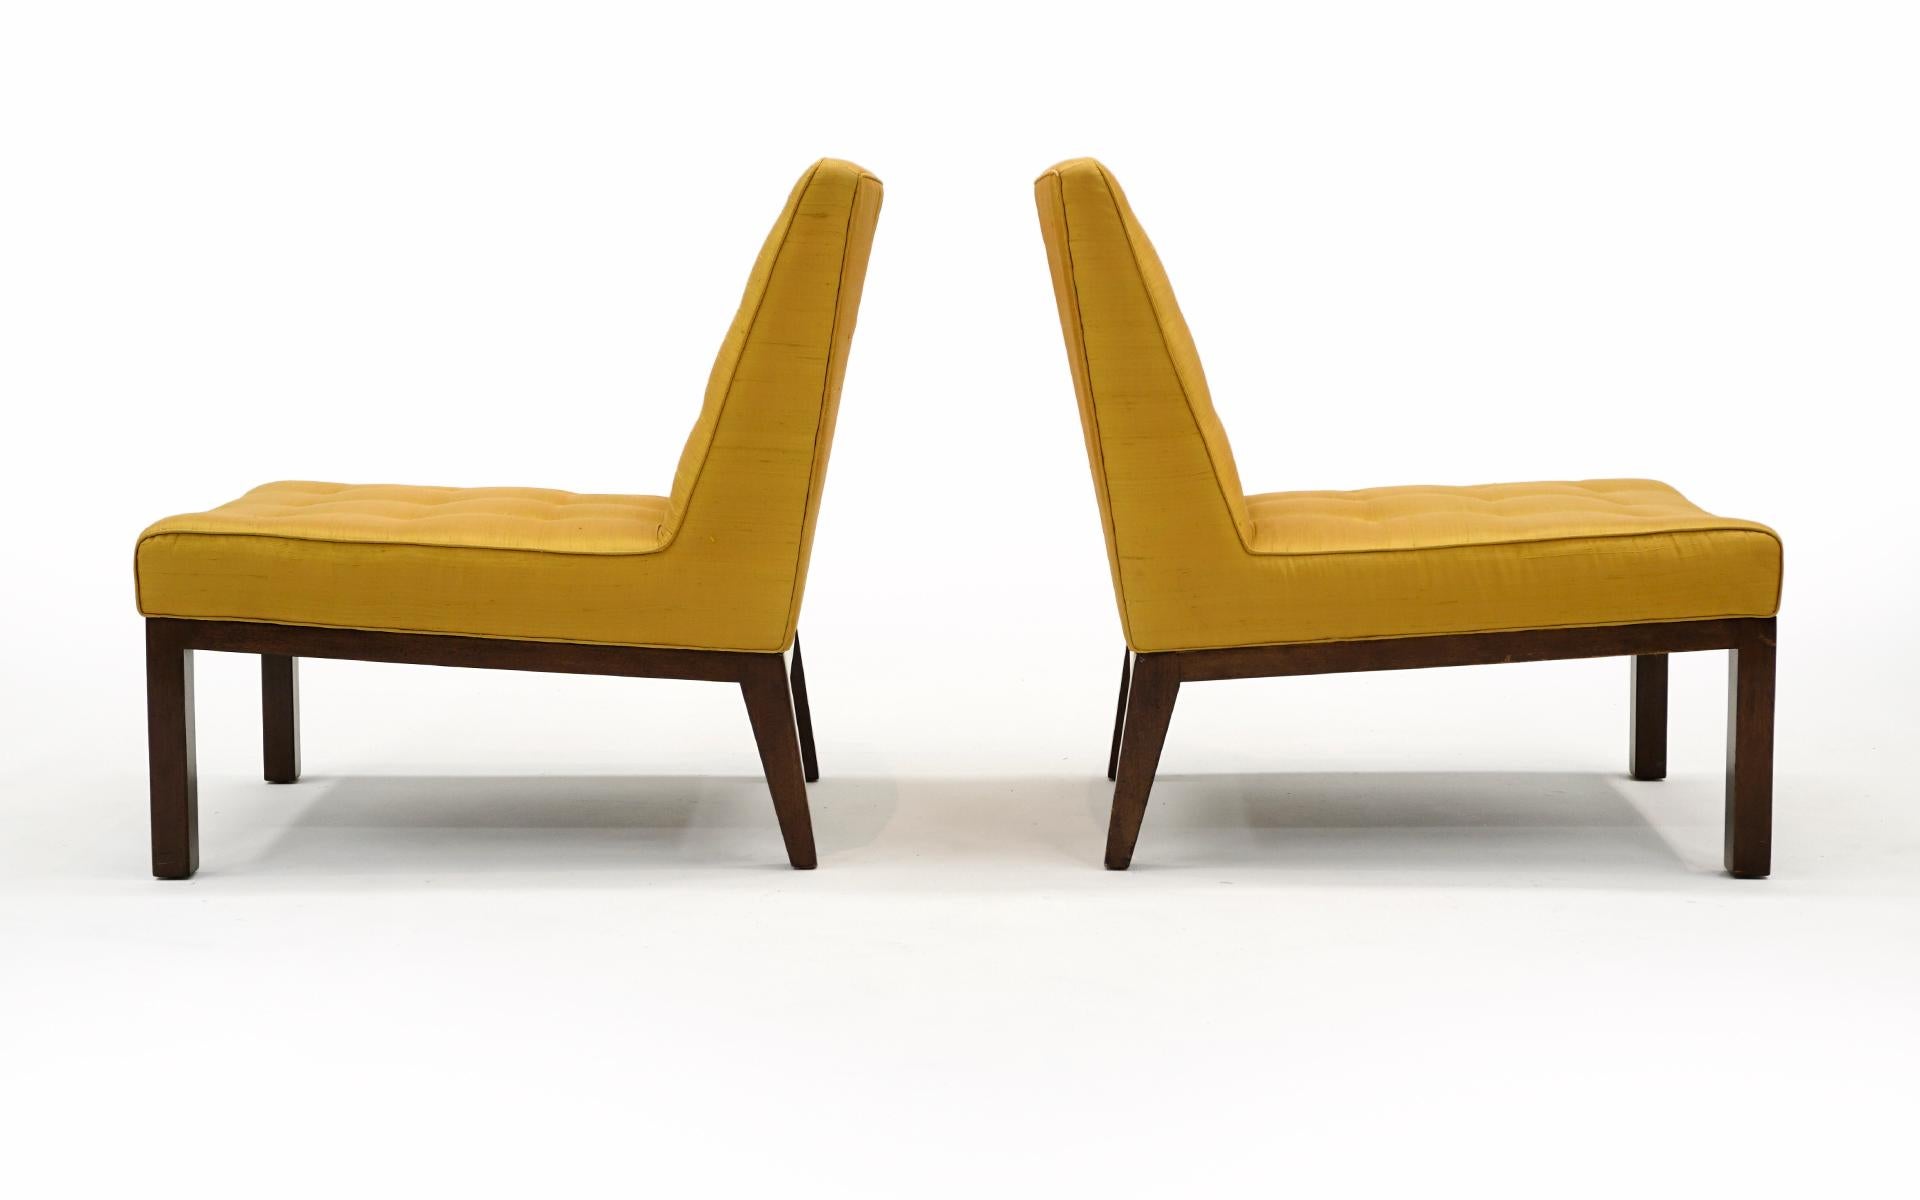 Pair Slipper Lounge Chairs by Edward Wormley for Dunbar, Original, Signed In Good Condition For Sale In Kansas City, MO